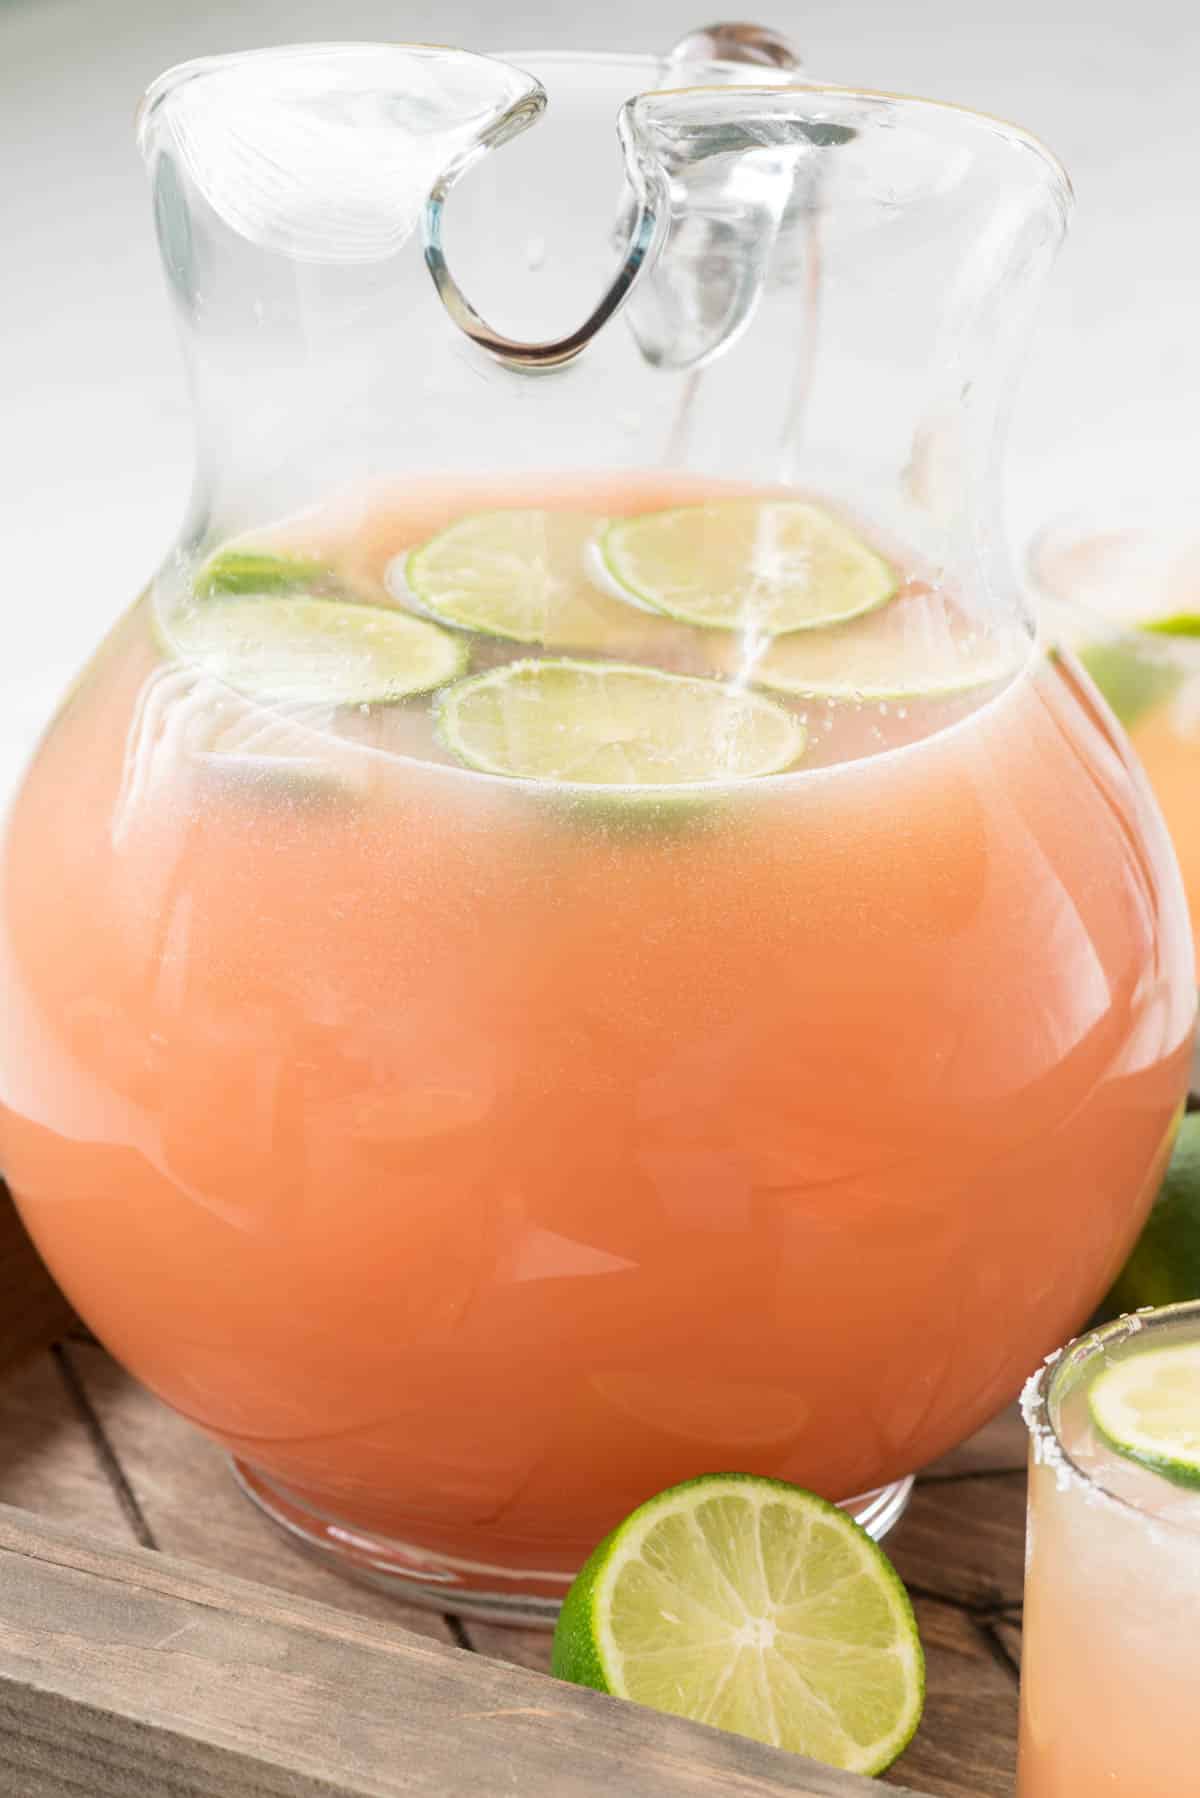 peach colored drink in a glass pitcher with a lime slice in the drink.